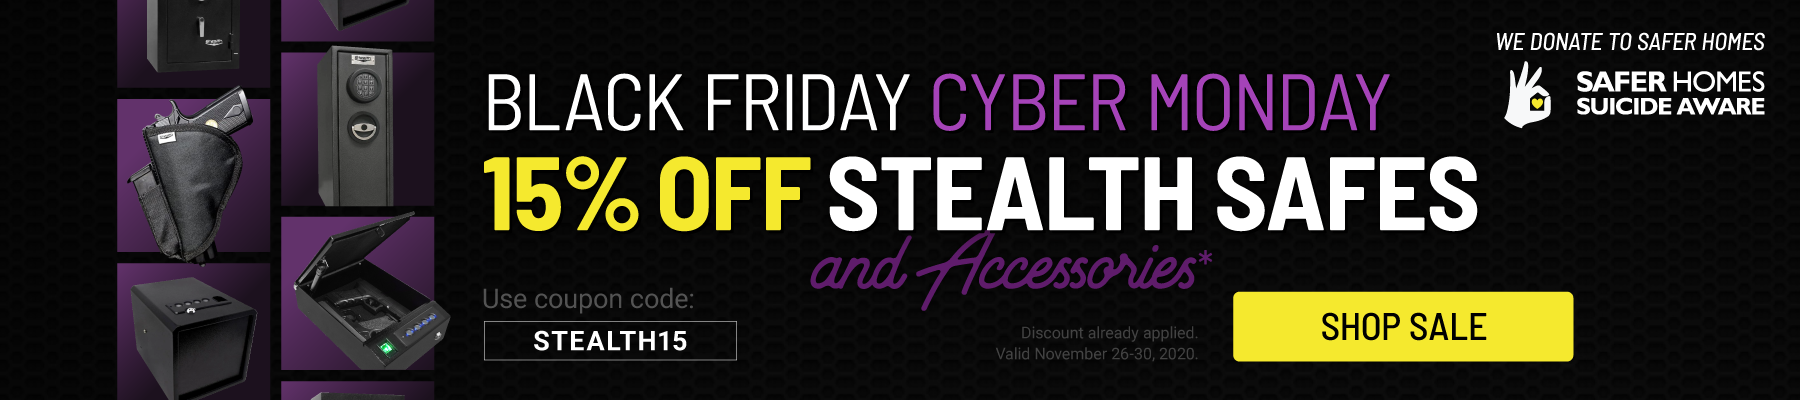 Stealth Black Friday Sale - 15% off Select Stealth Products